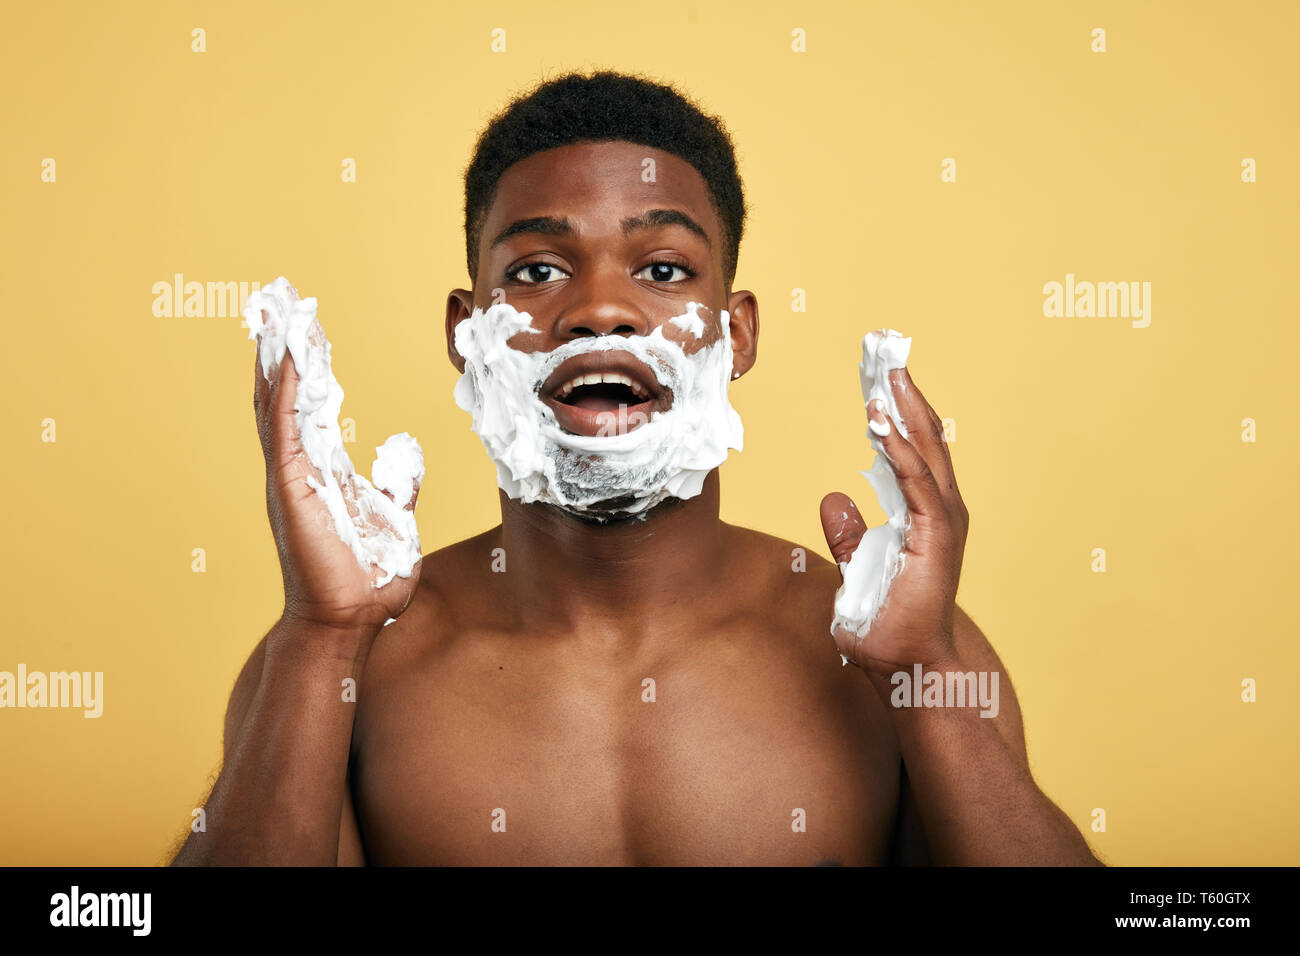 handsome shirtless Afro guy with smeared face and hands with foam. close up photo. Stock Photo